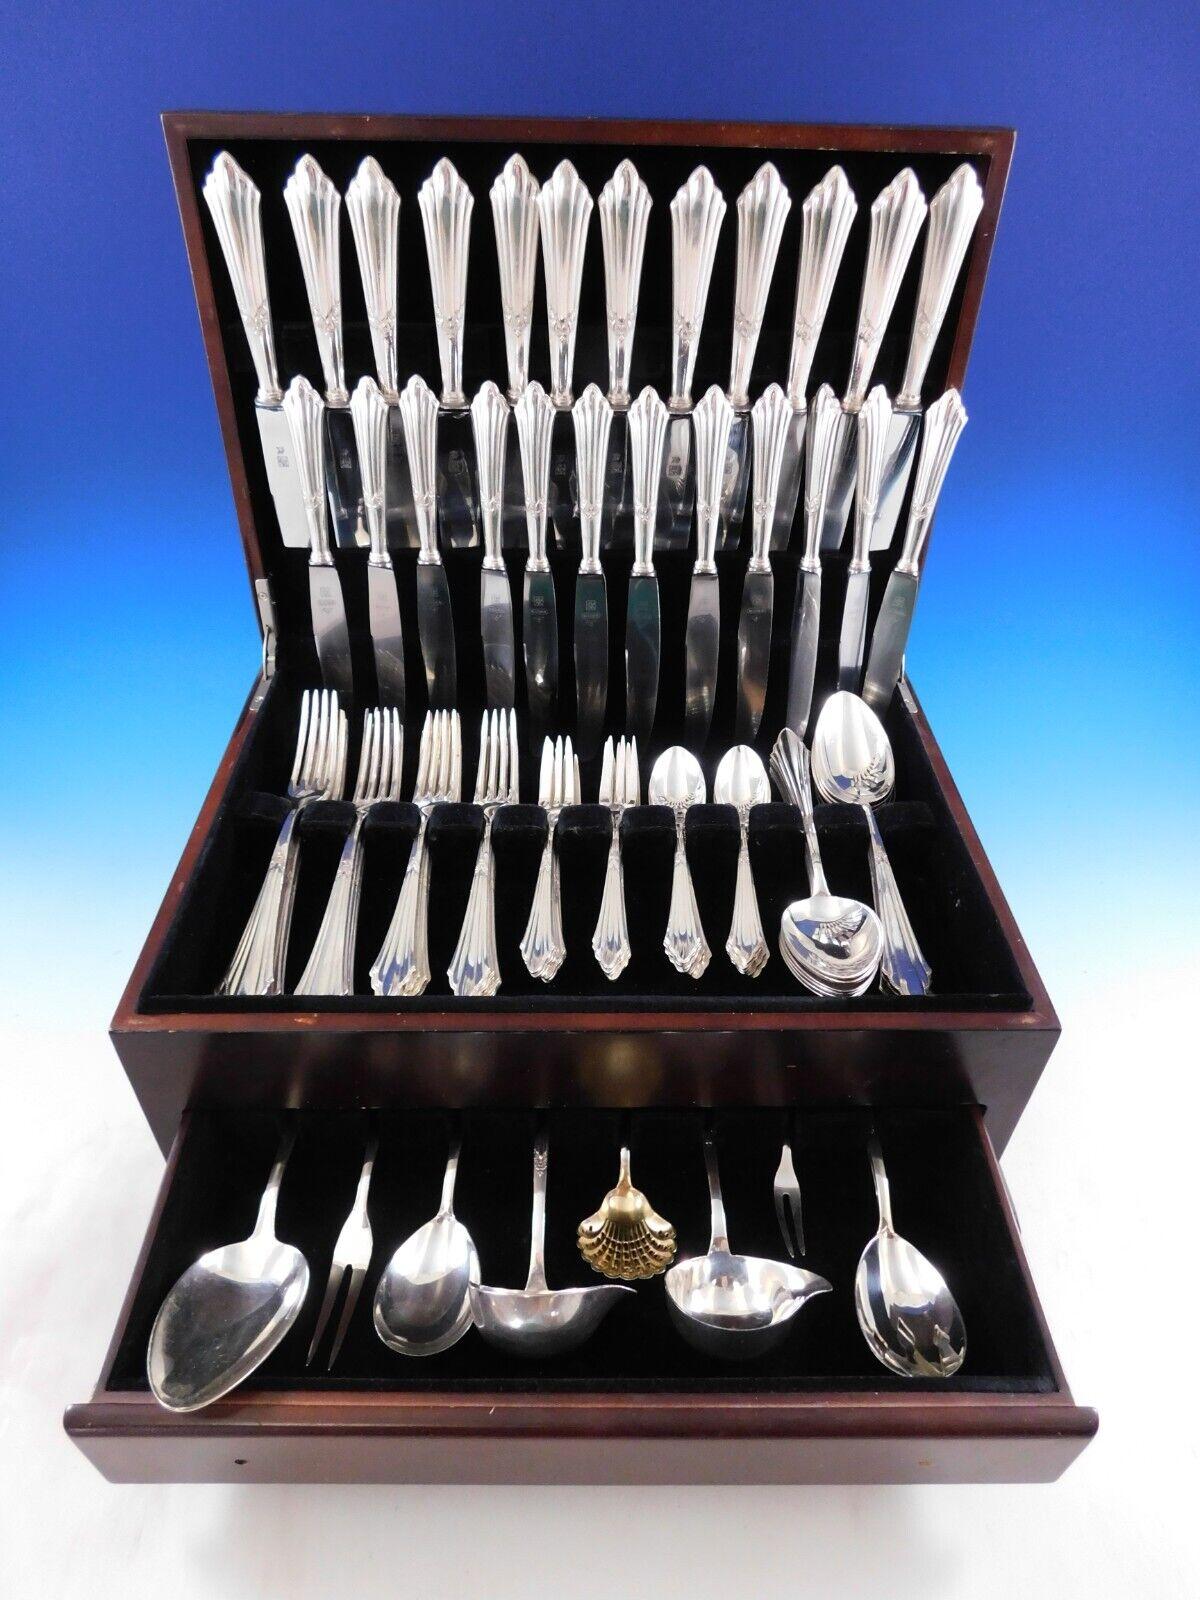 Facher by WMF Silverplated German Flatware set - 91 pieces. This is the silverplated version of the sterling Fan pattern by WMF. This set includes:

12 Dinner Knives, 10 1/8